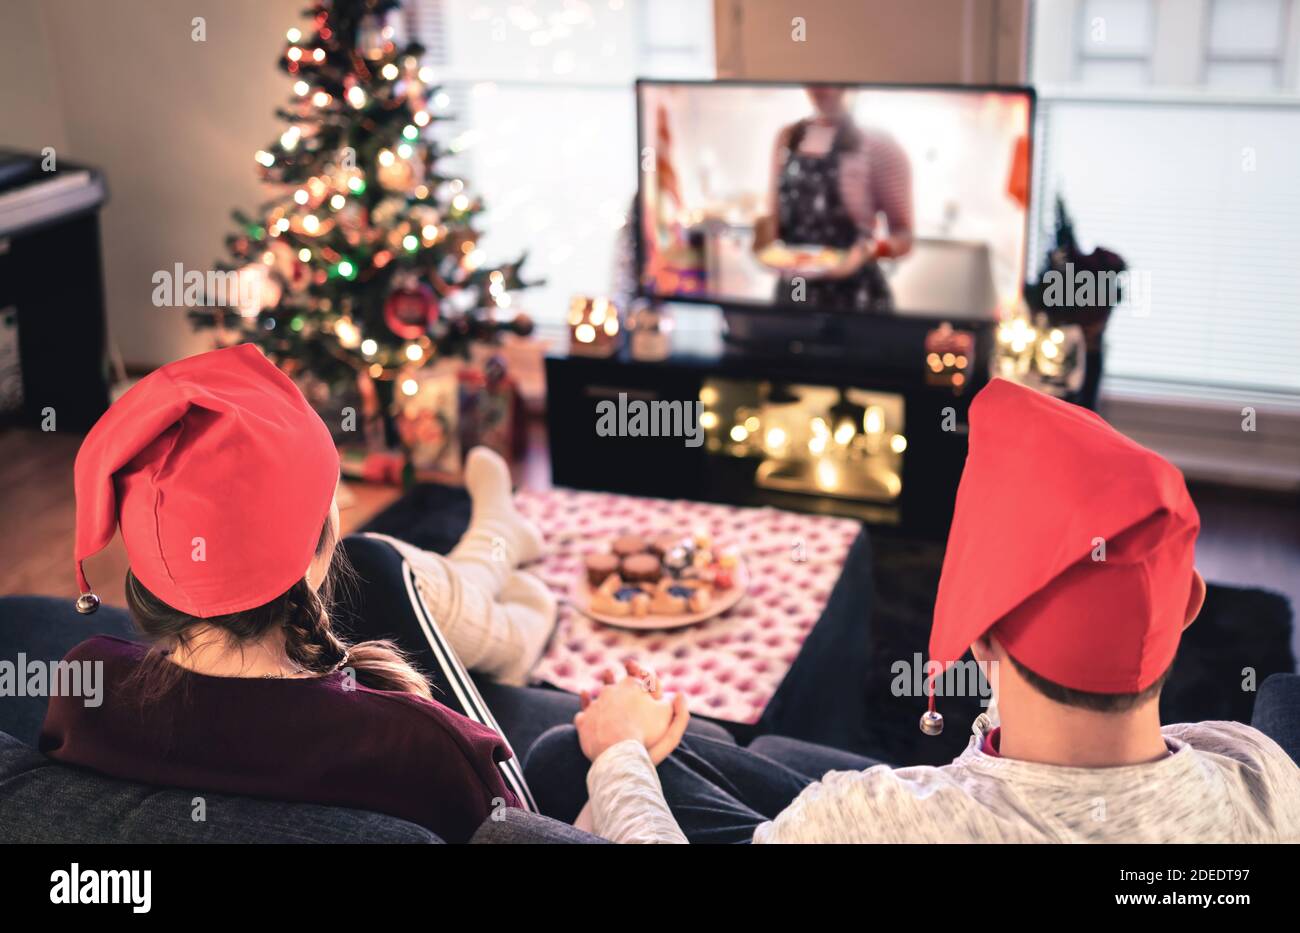 Couple watching tv on Christmas. Happy family holiday at home. Man and woman on couch relaxing with tree, decorations, lights, candles and television. Stock Photo